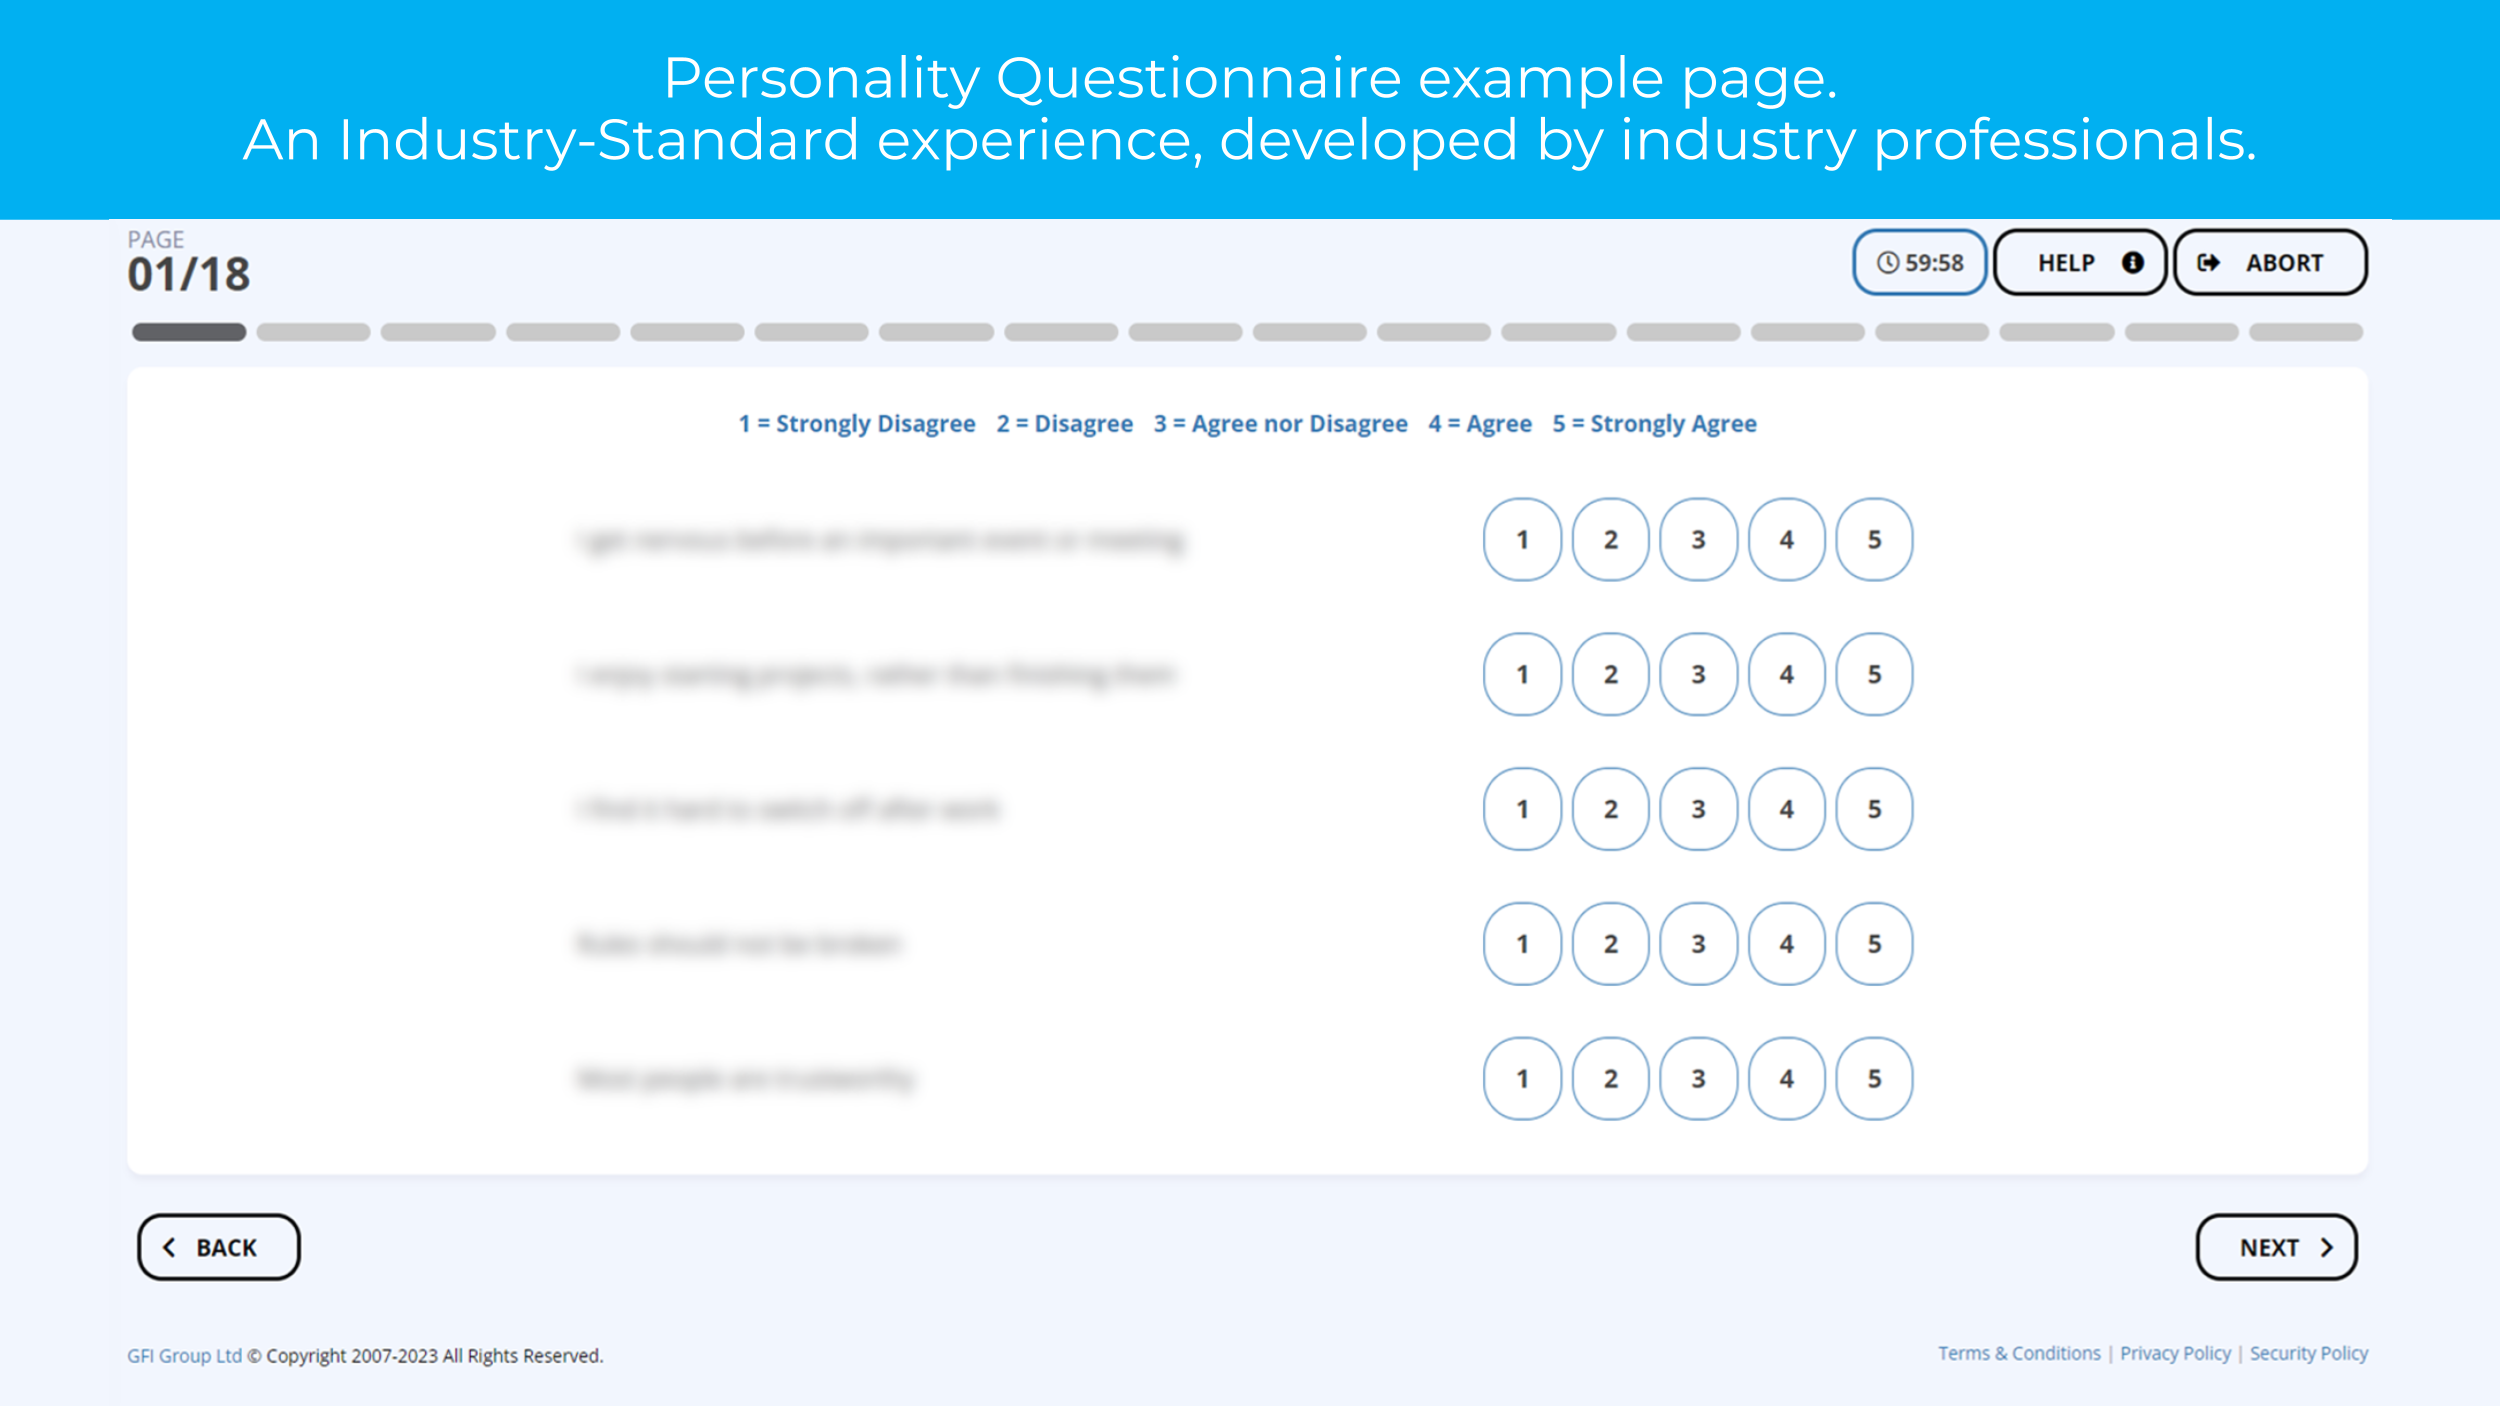 Go Premium Personality Questionnaire Example